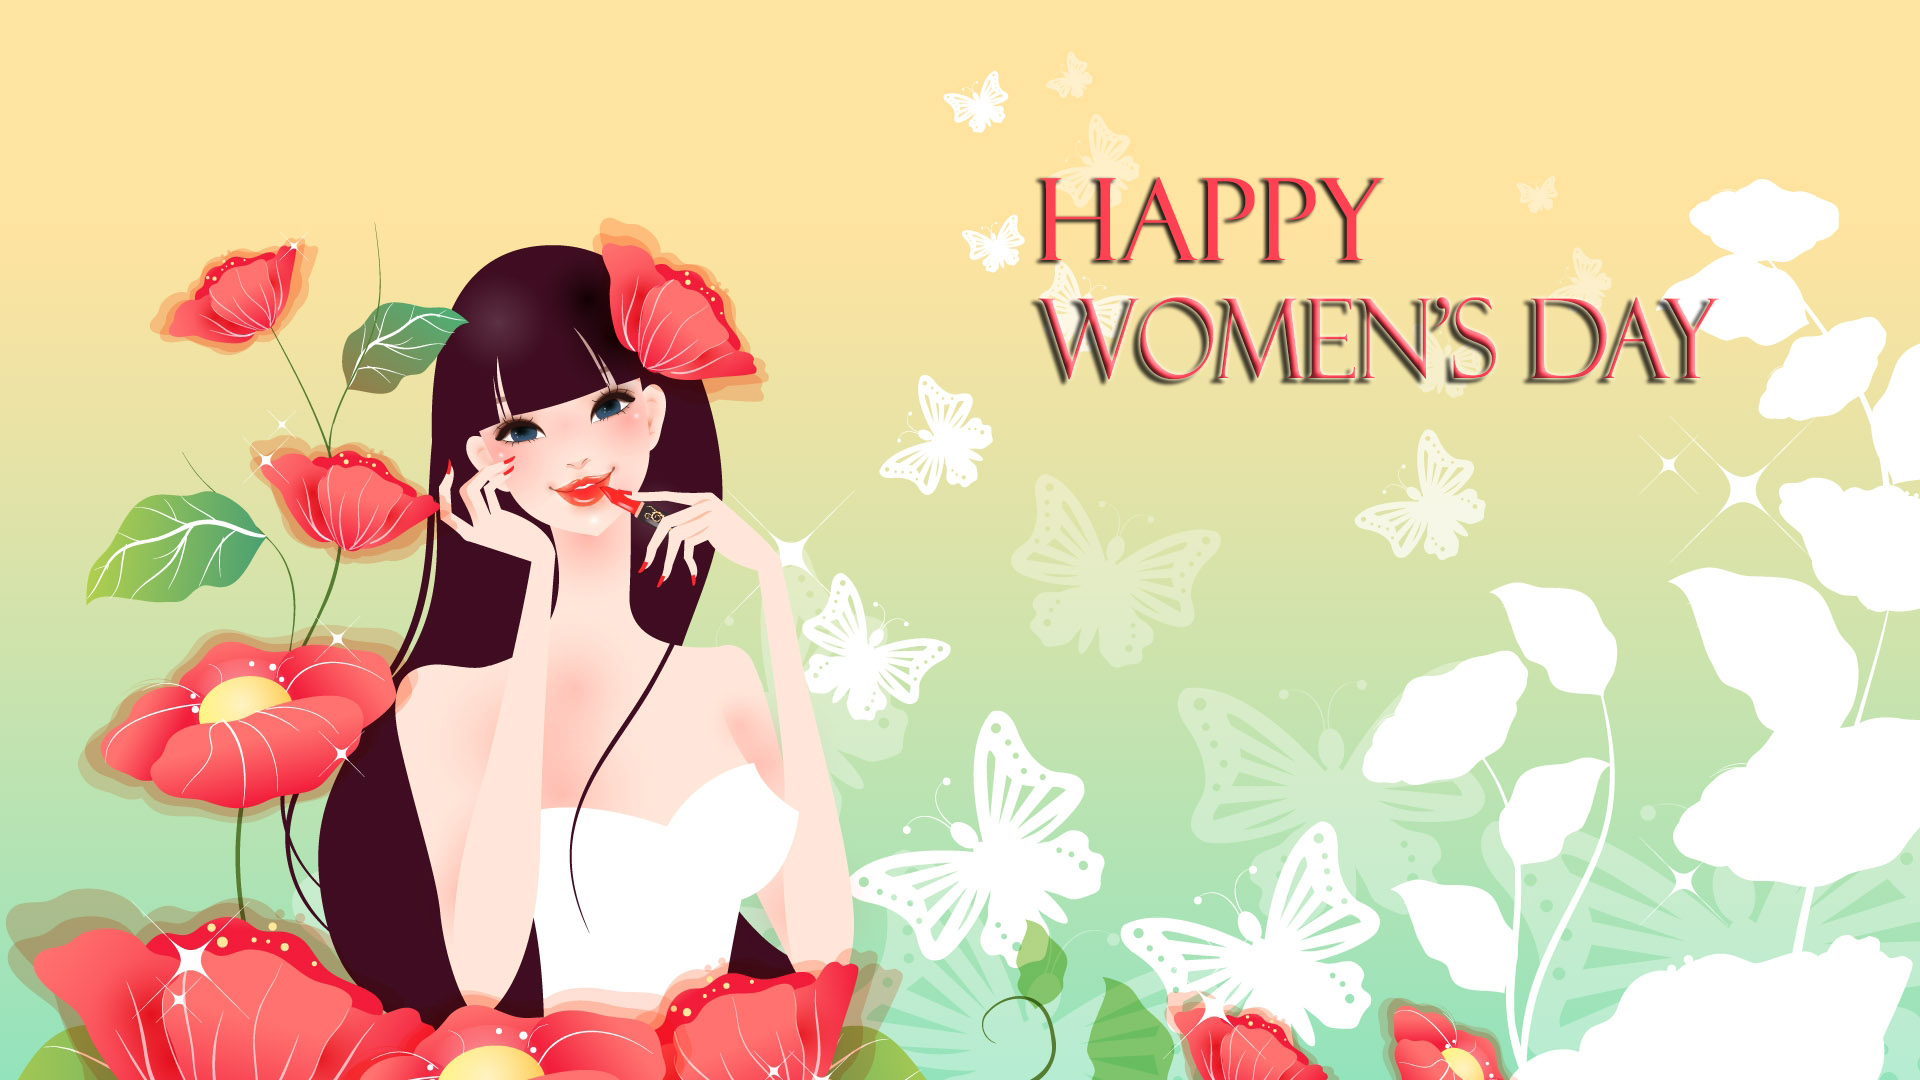 holiday, women's day, butterfly, flower, happy women's day, statement